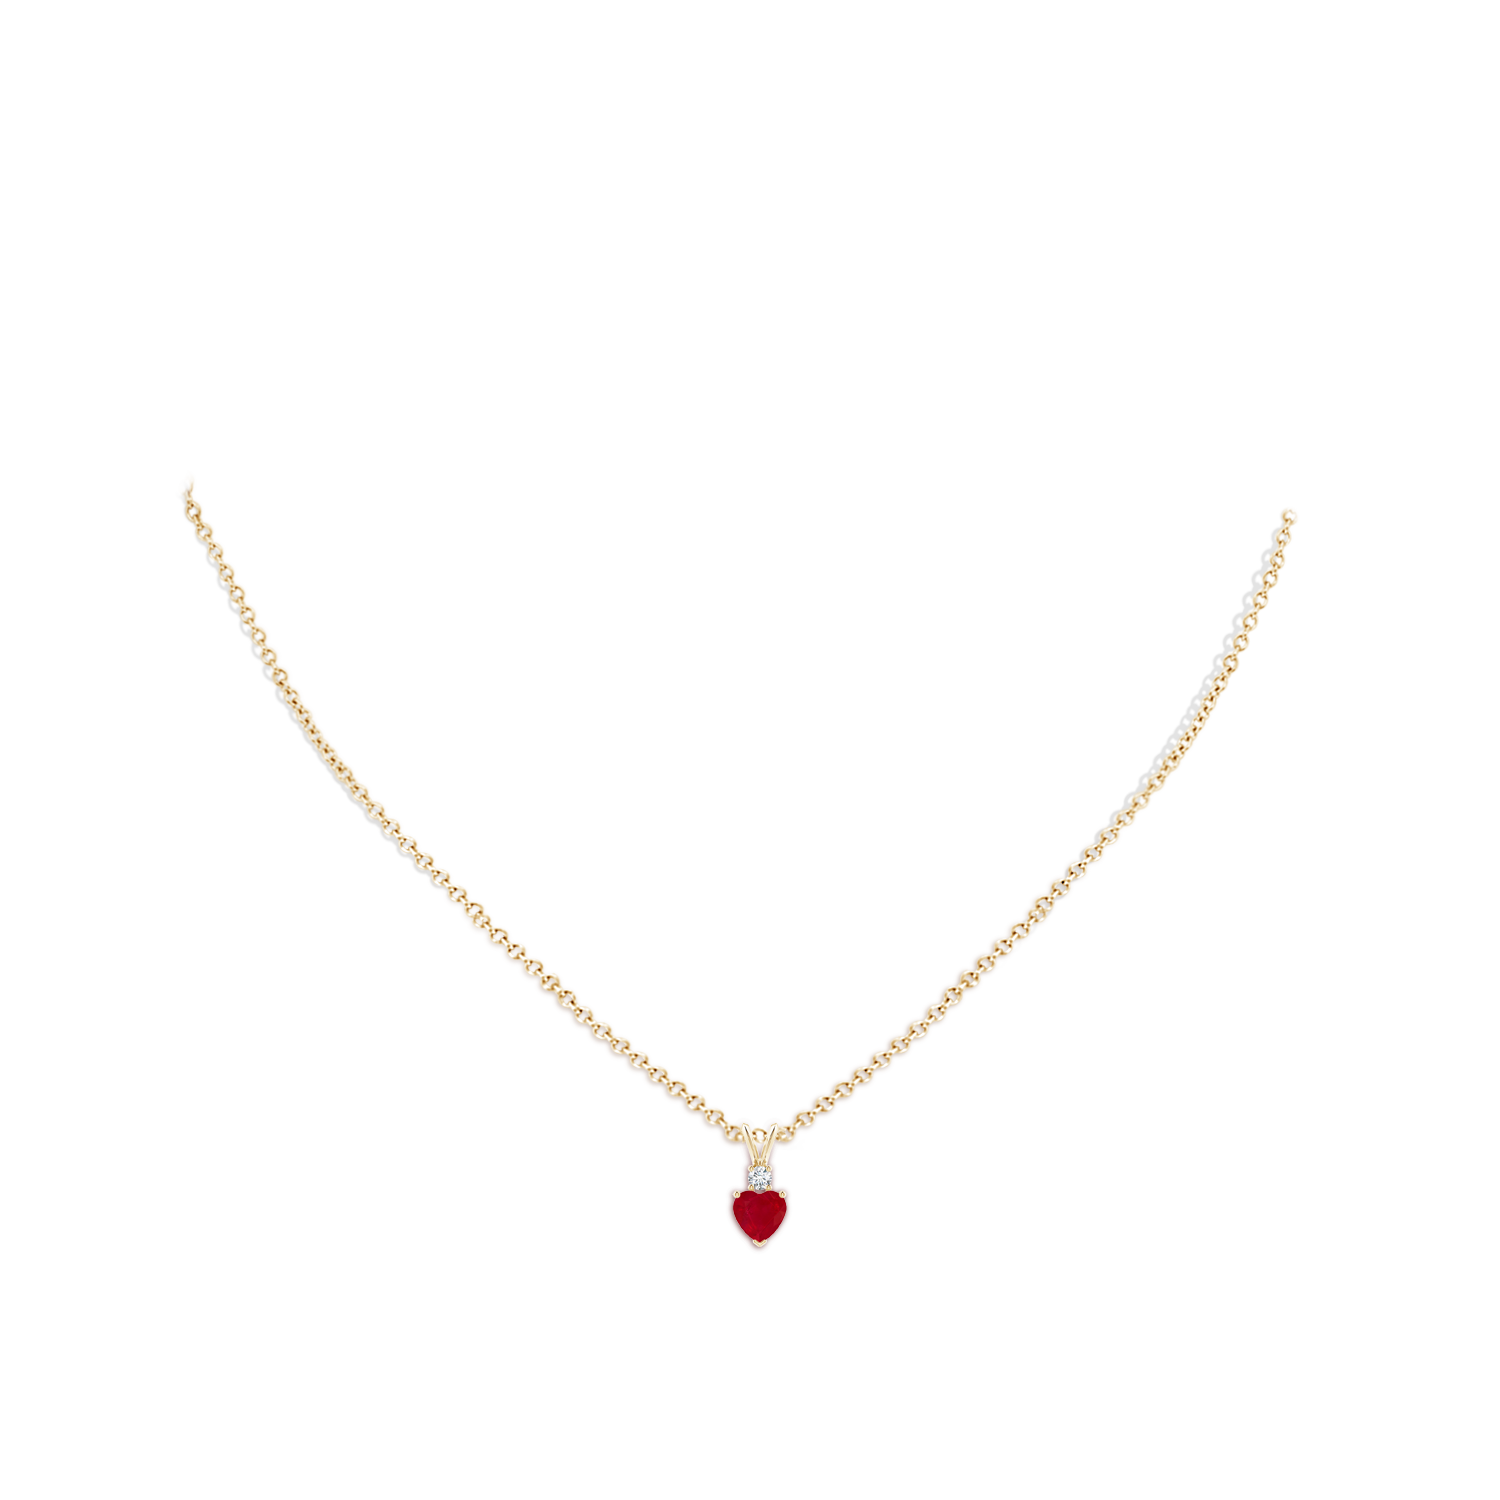 AA - Ruby / 0.59 CT / 14 KT Yellow Gold